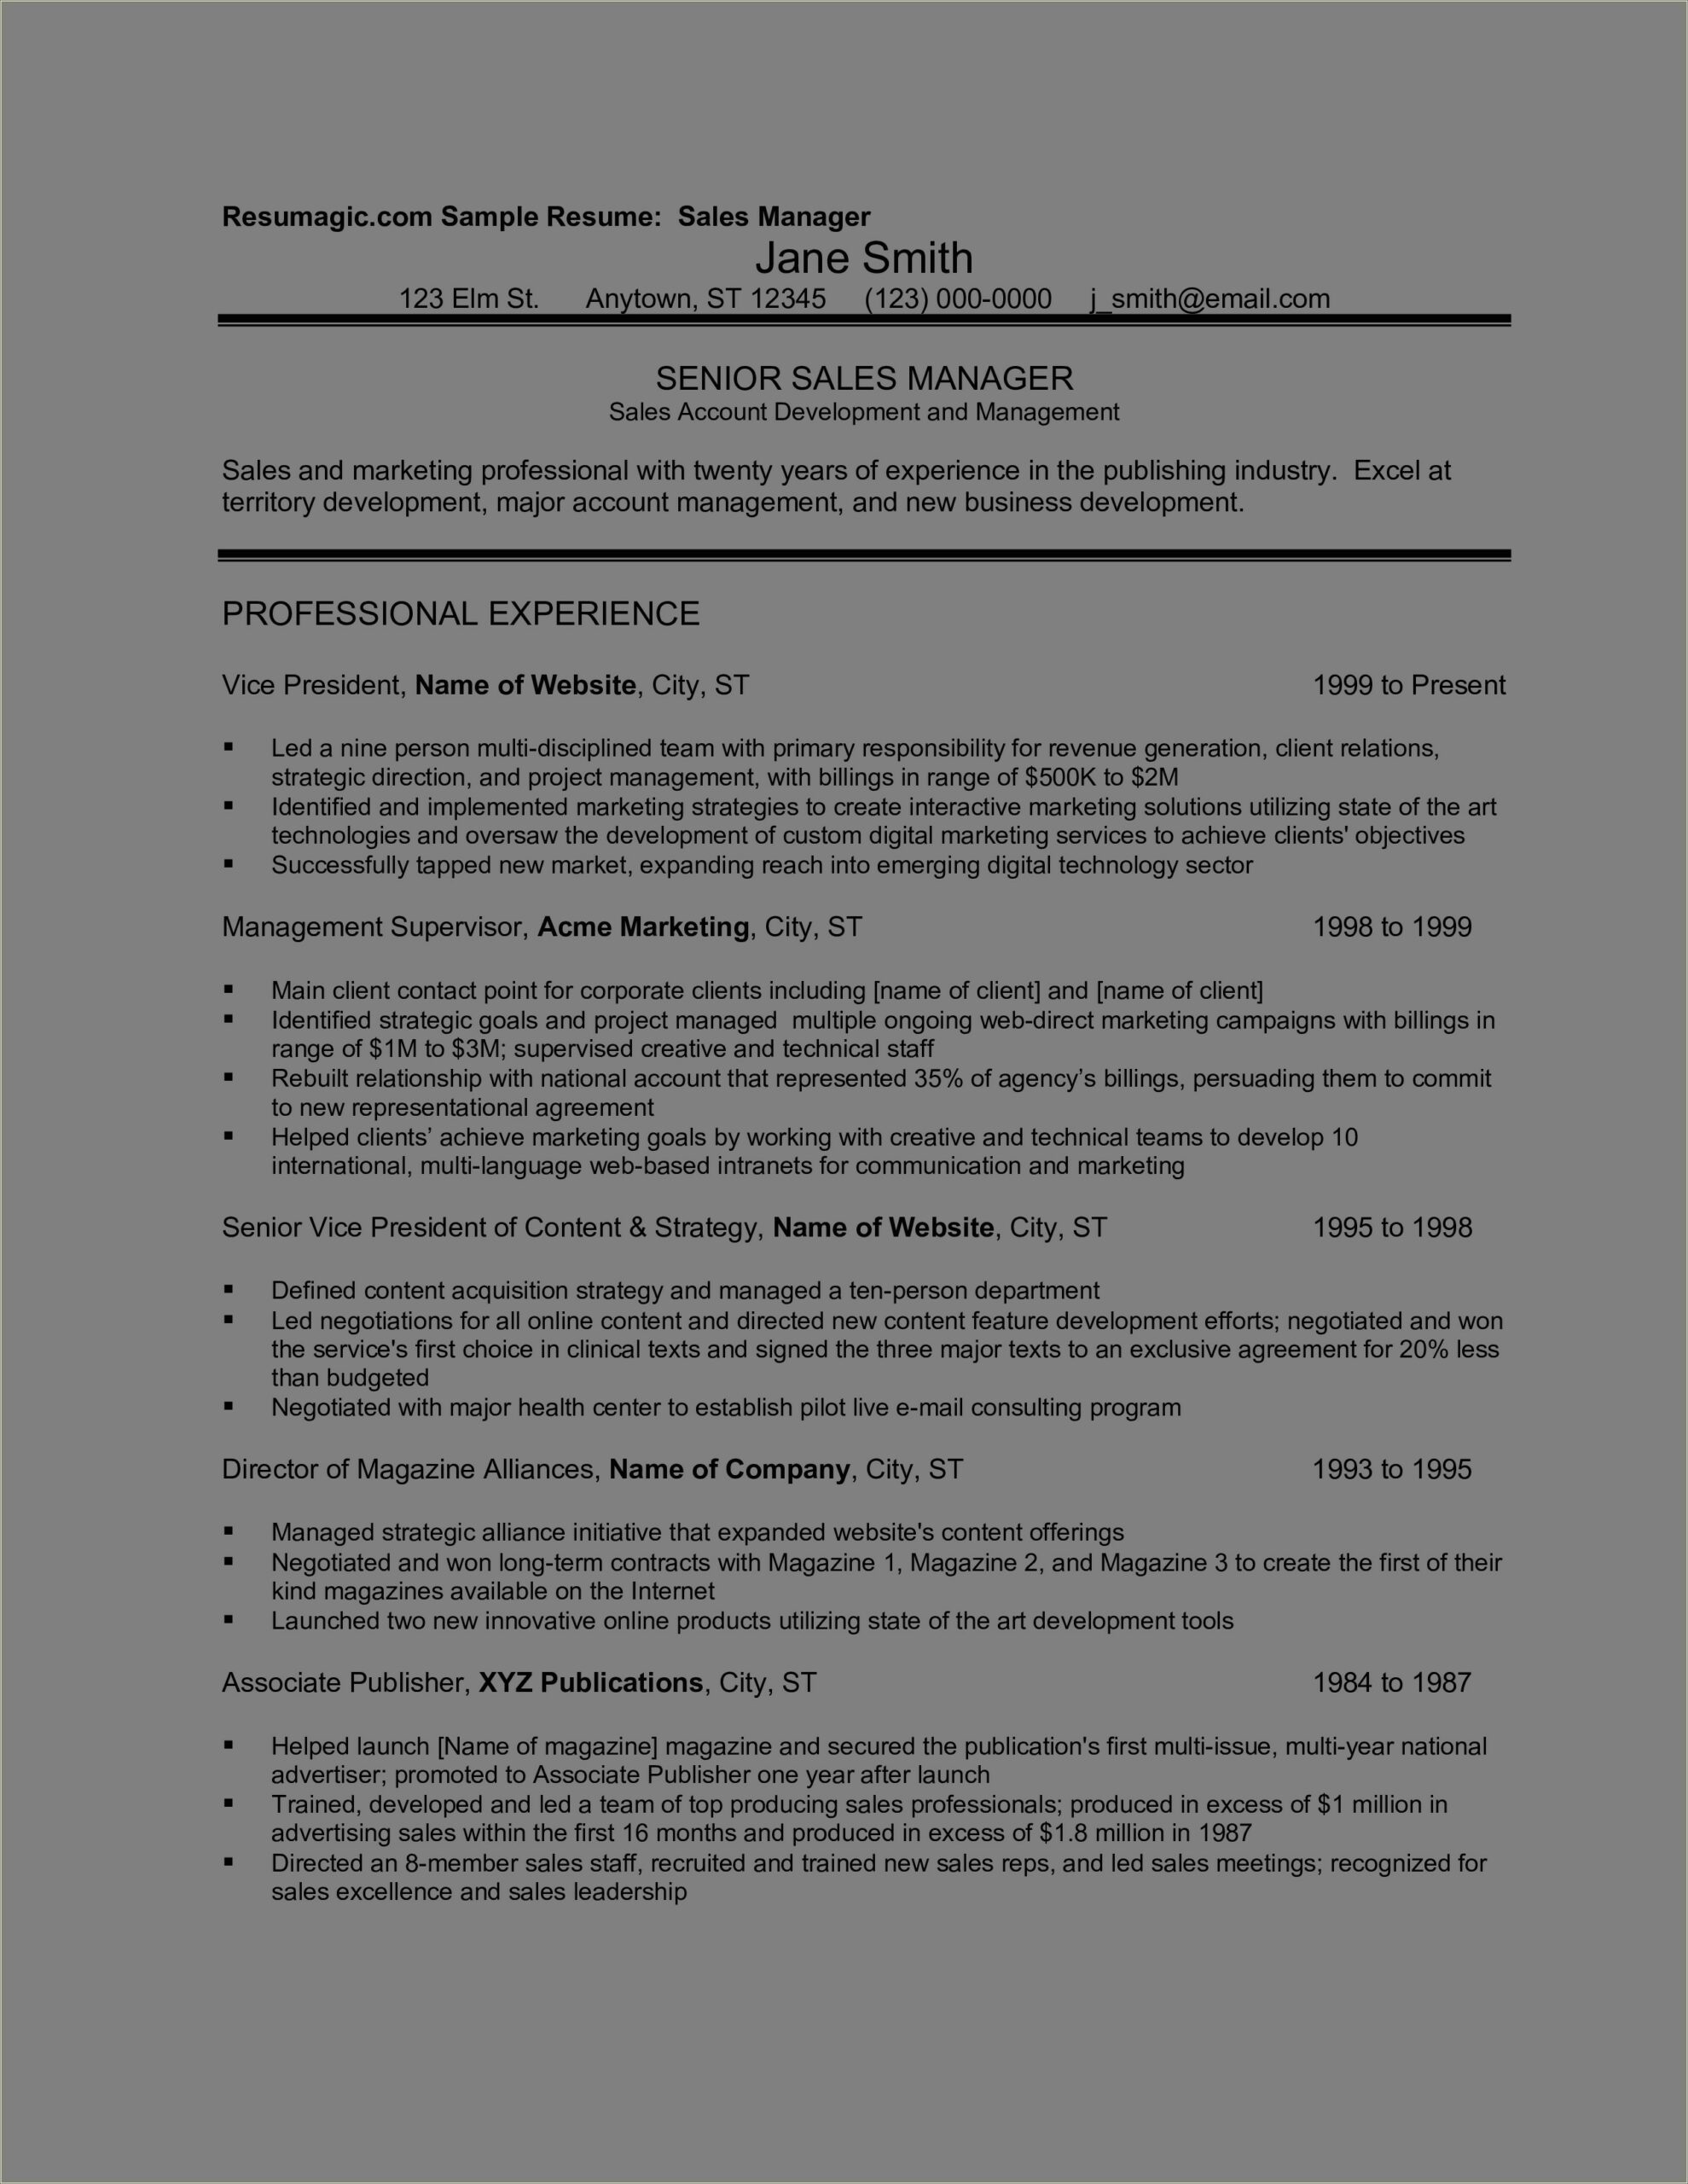 Customer Service And Sales Manager Resume